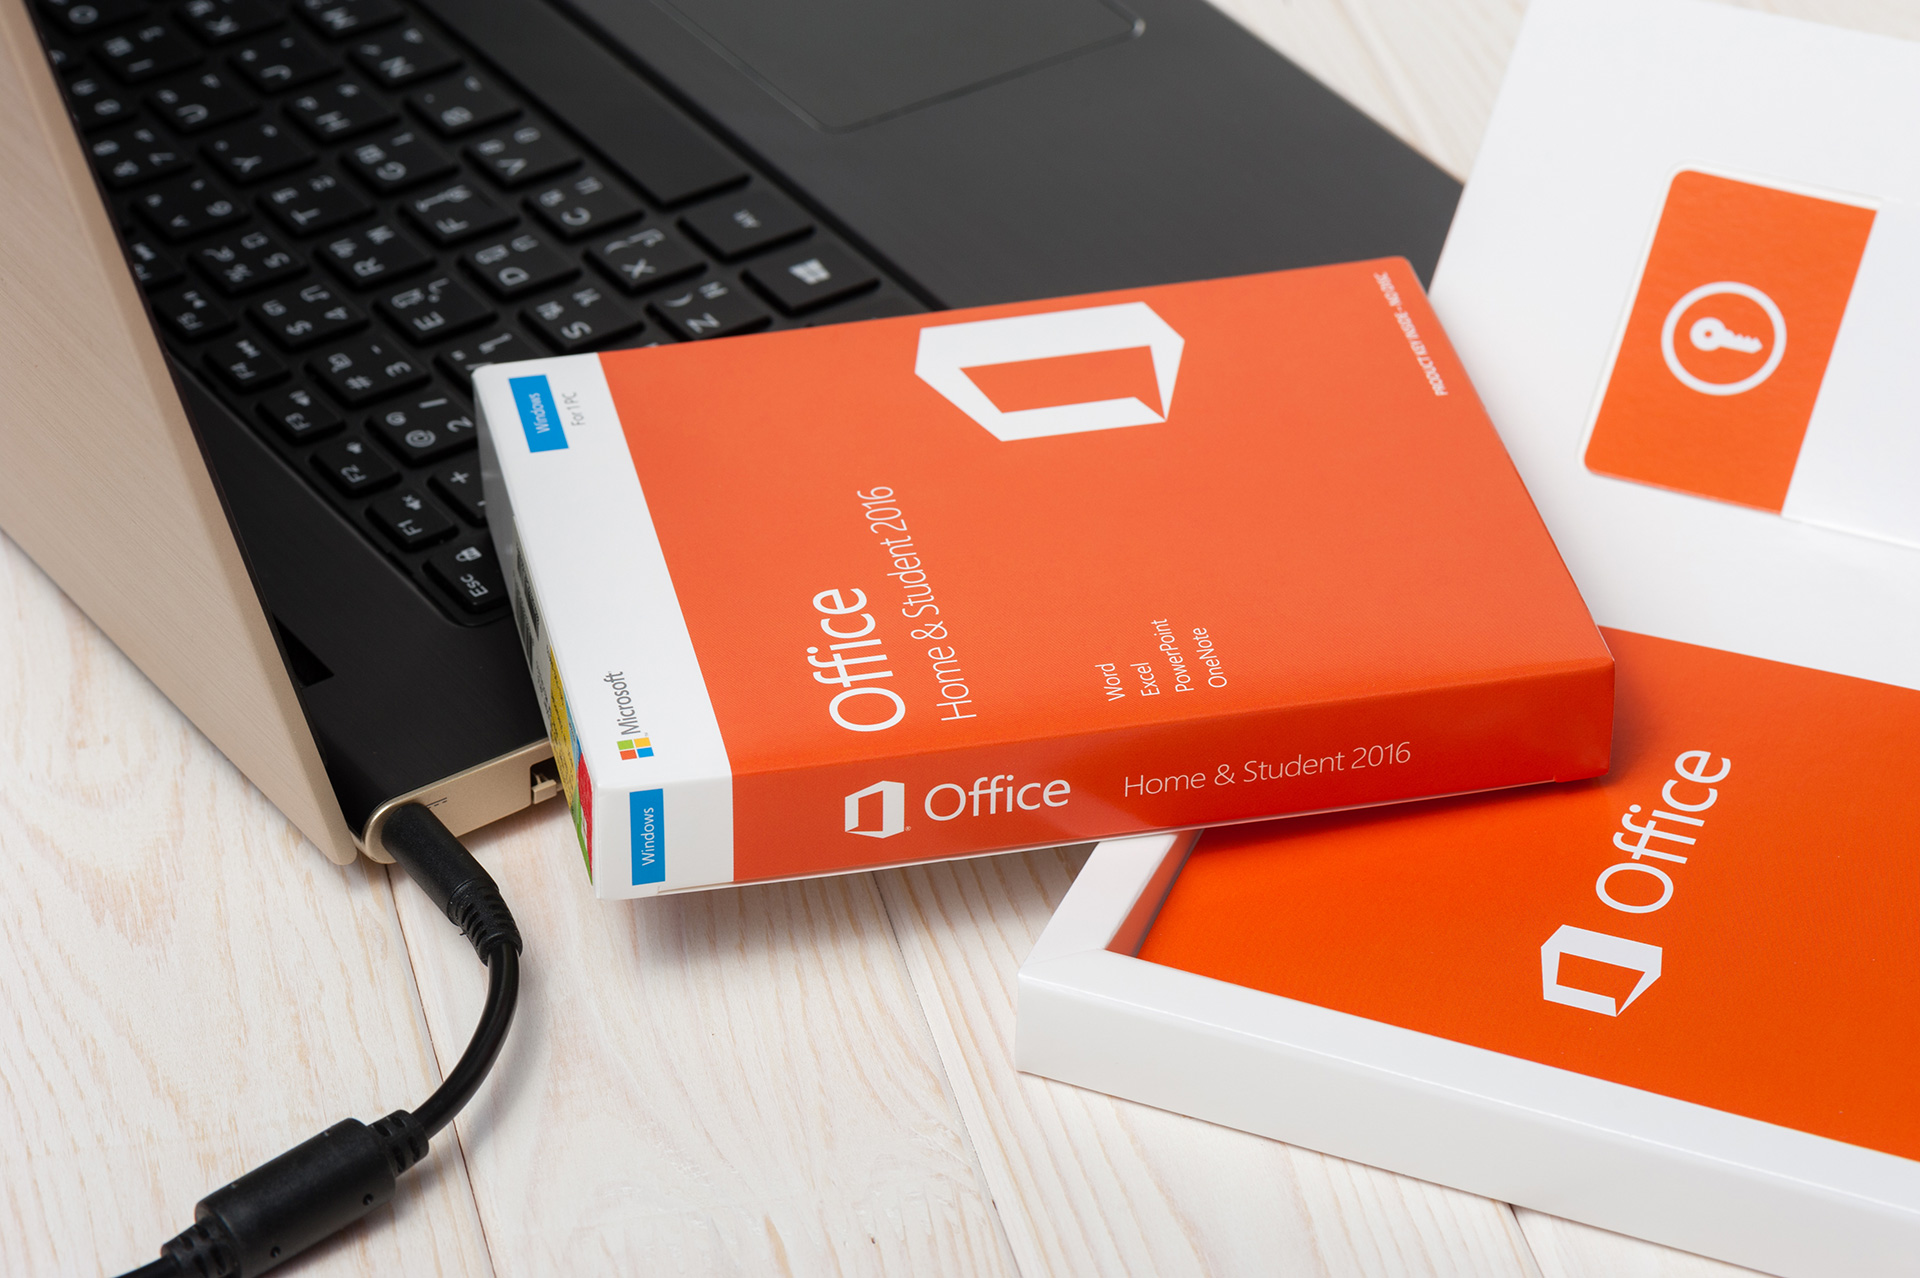 microsoft office home & student 2016 for apple mac